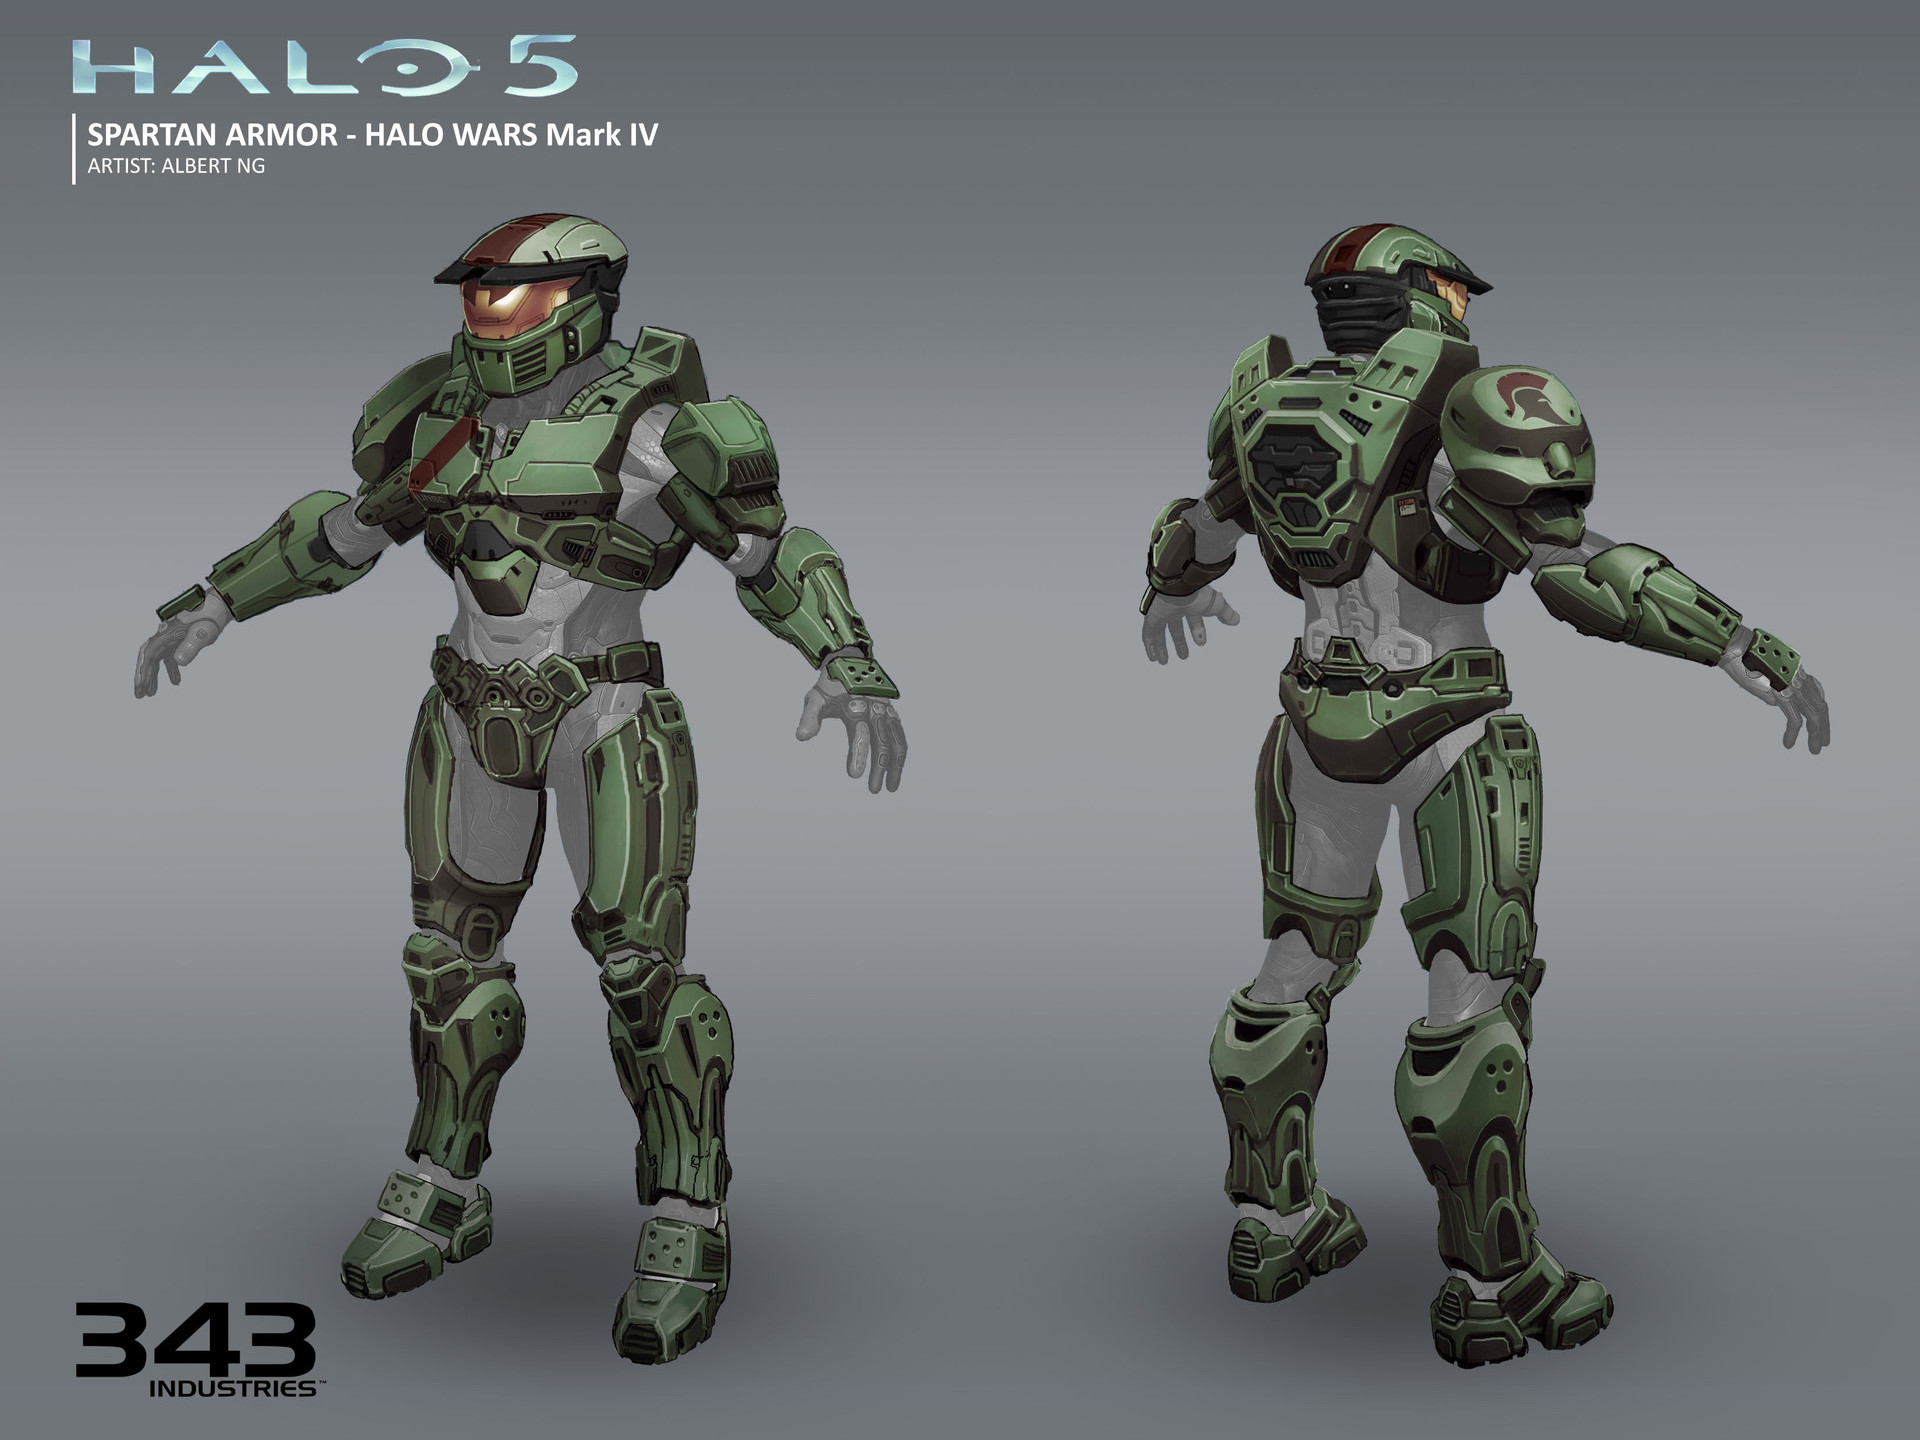 What armor color in Halo 5 is most similar to the canonical 